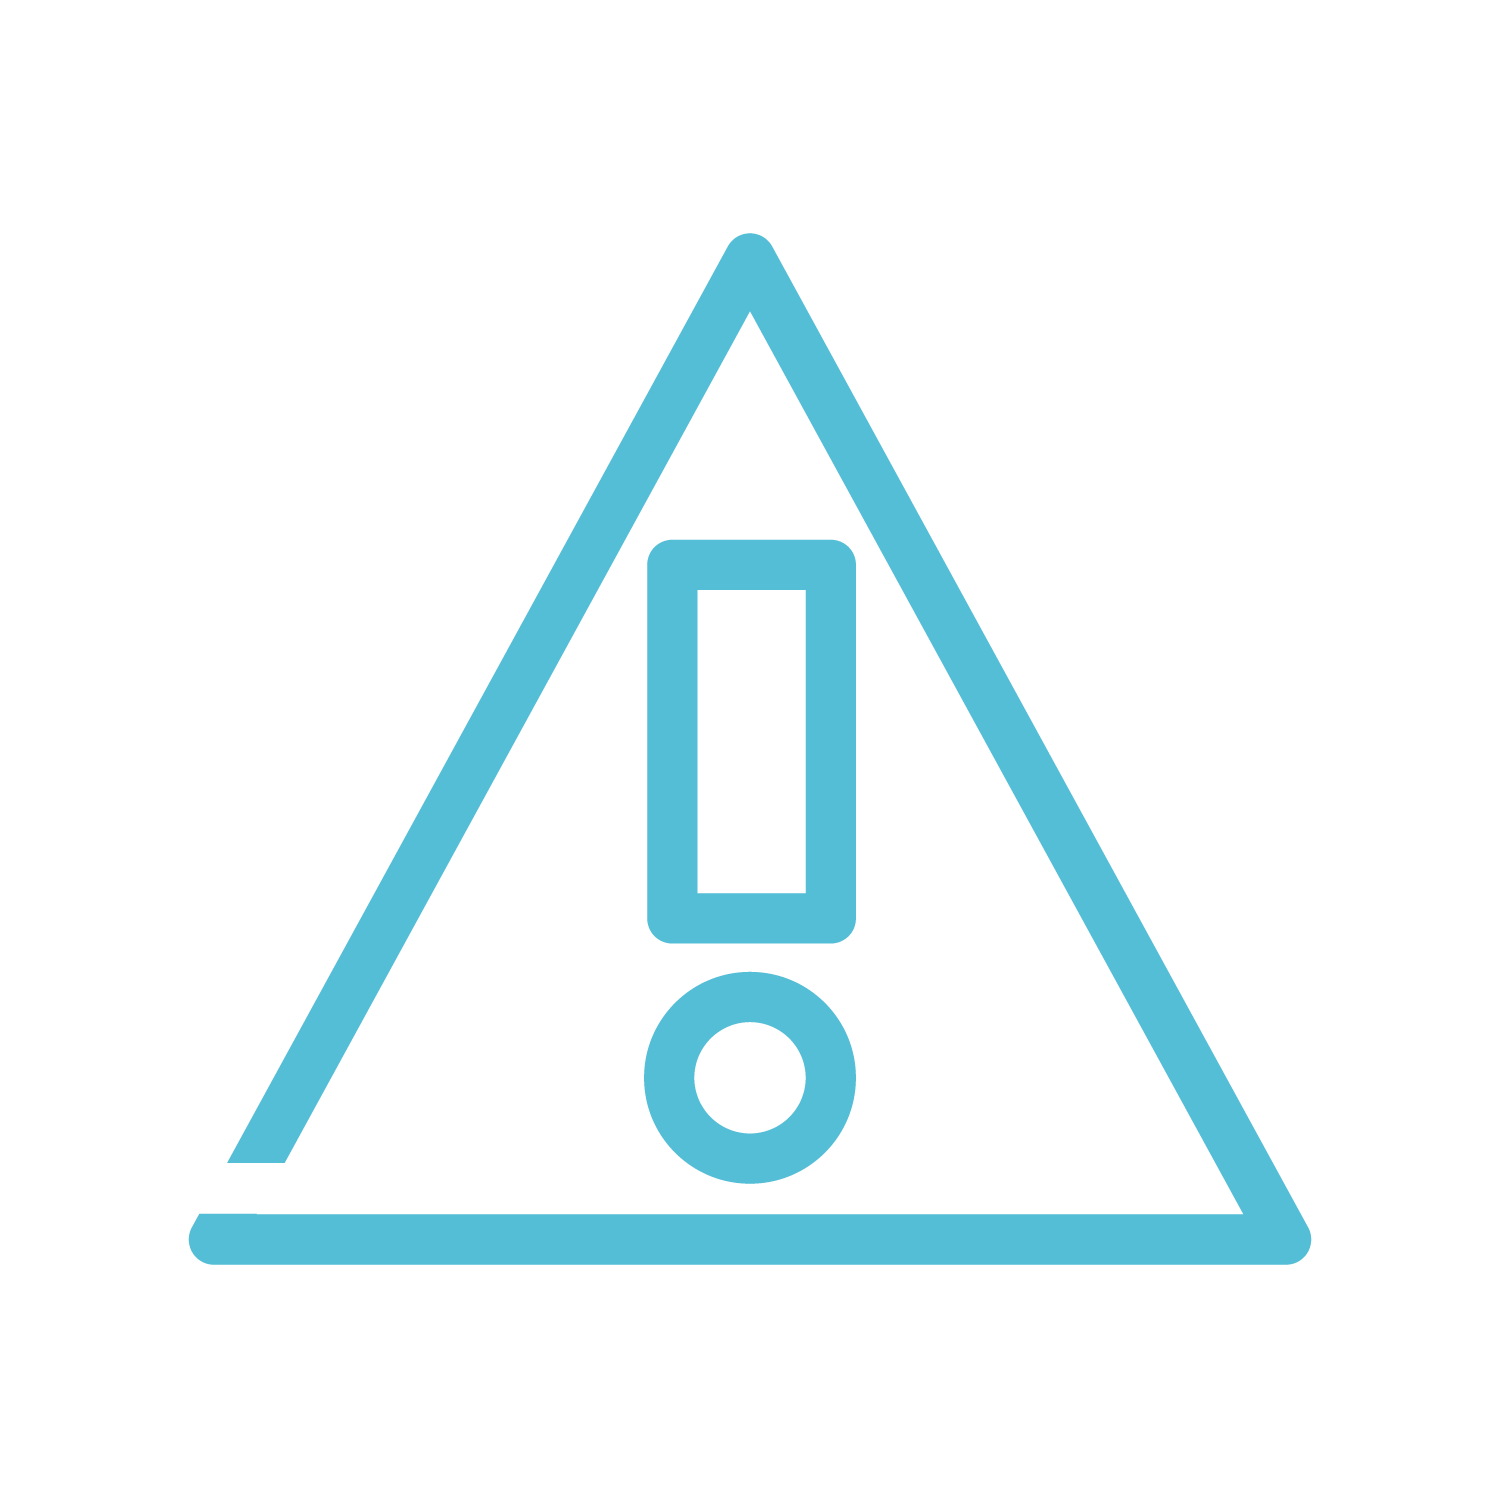 Exclamation mark in triangle graphic - JetGuard Icon for Safety